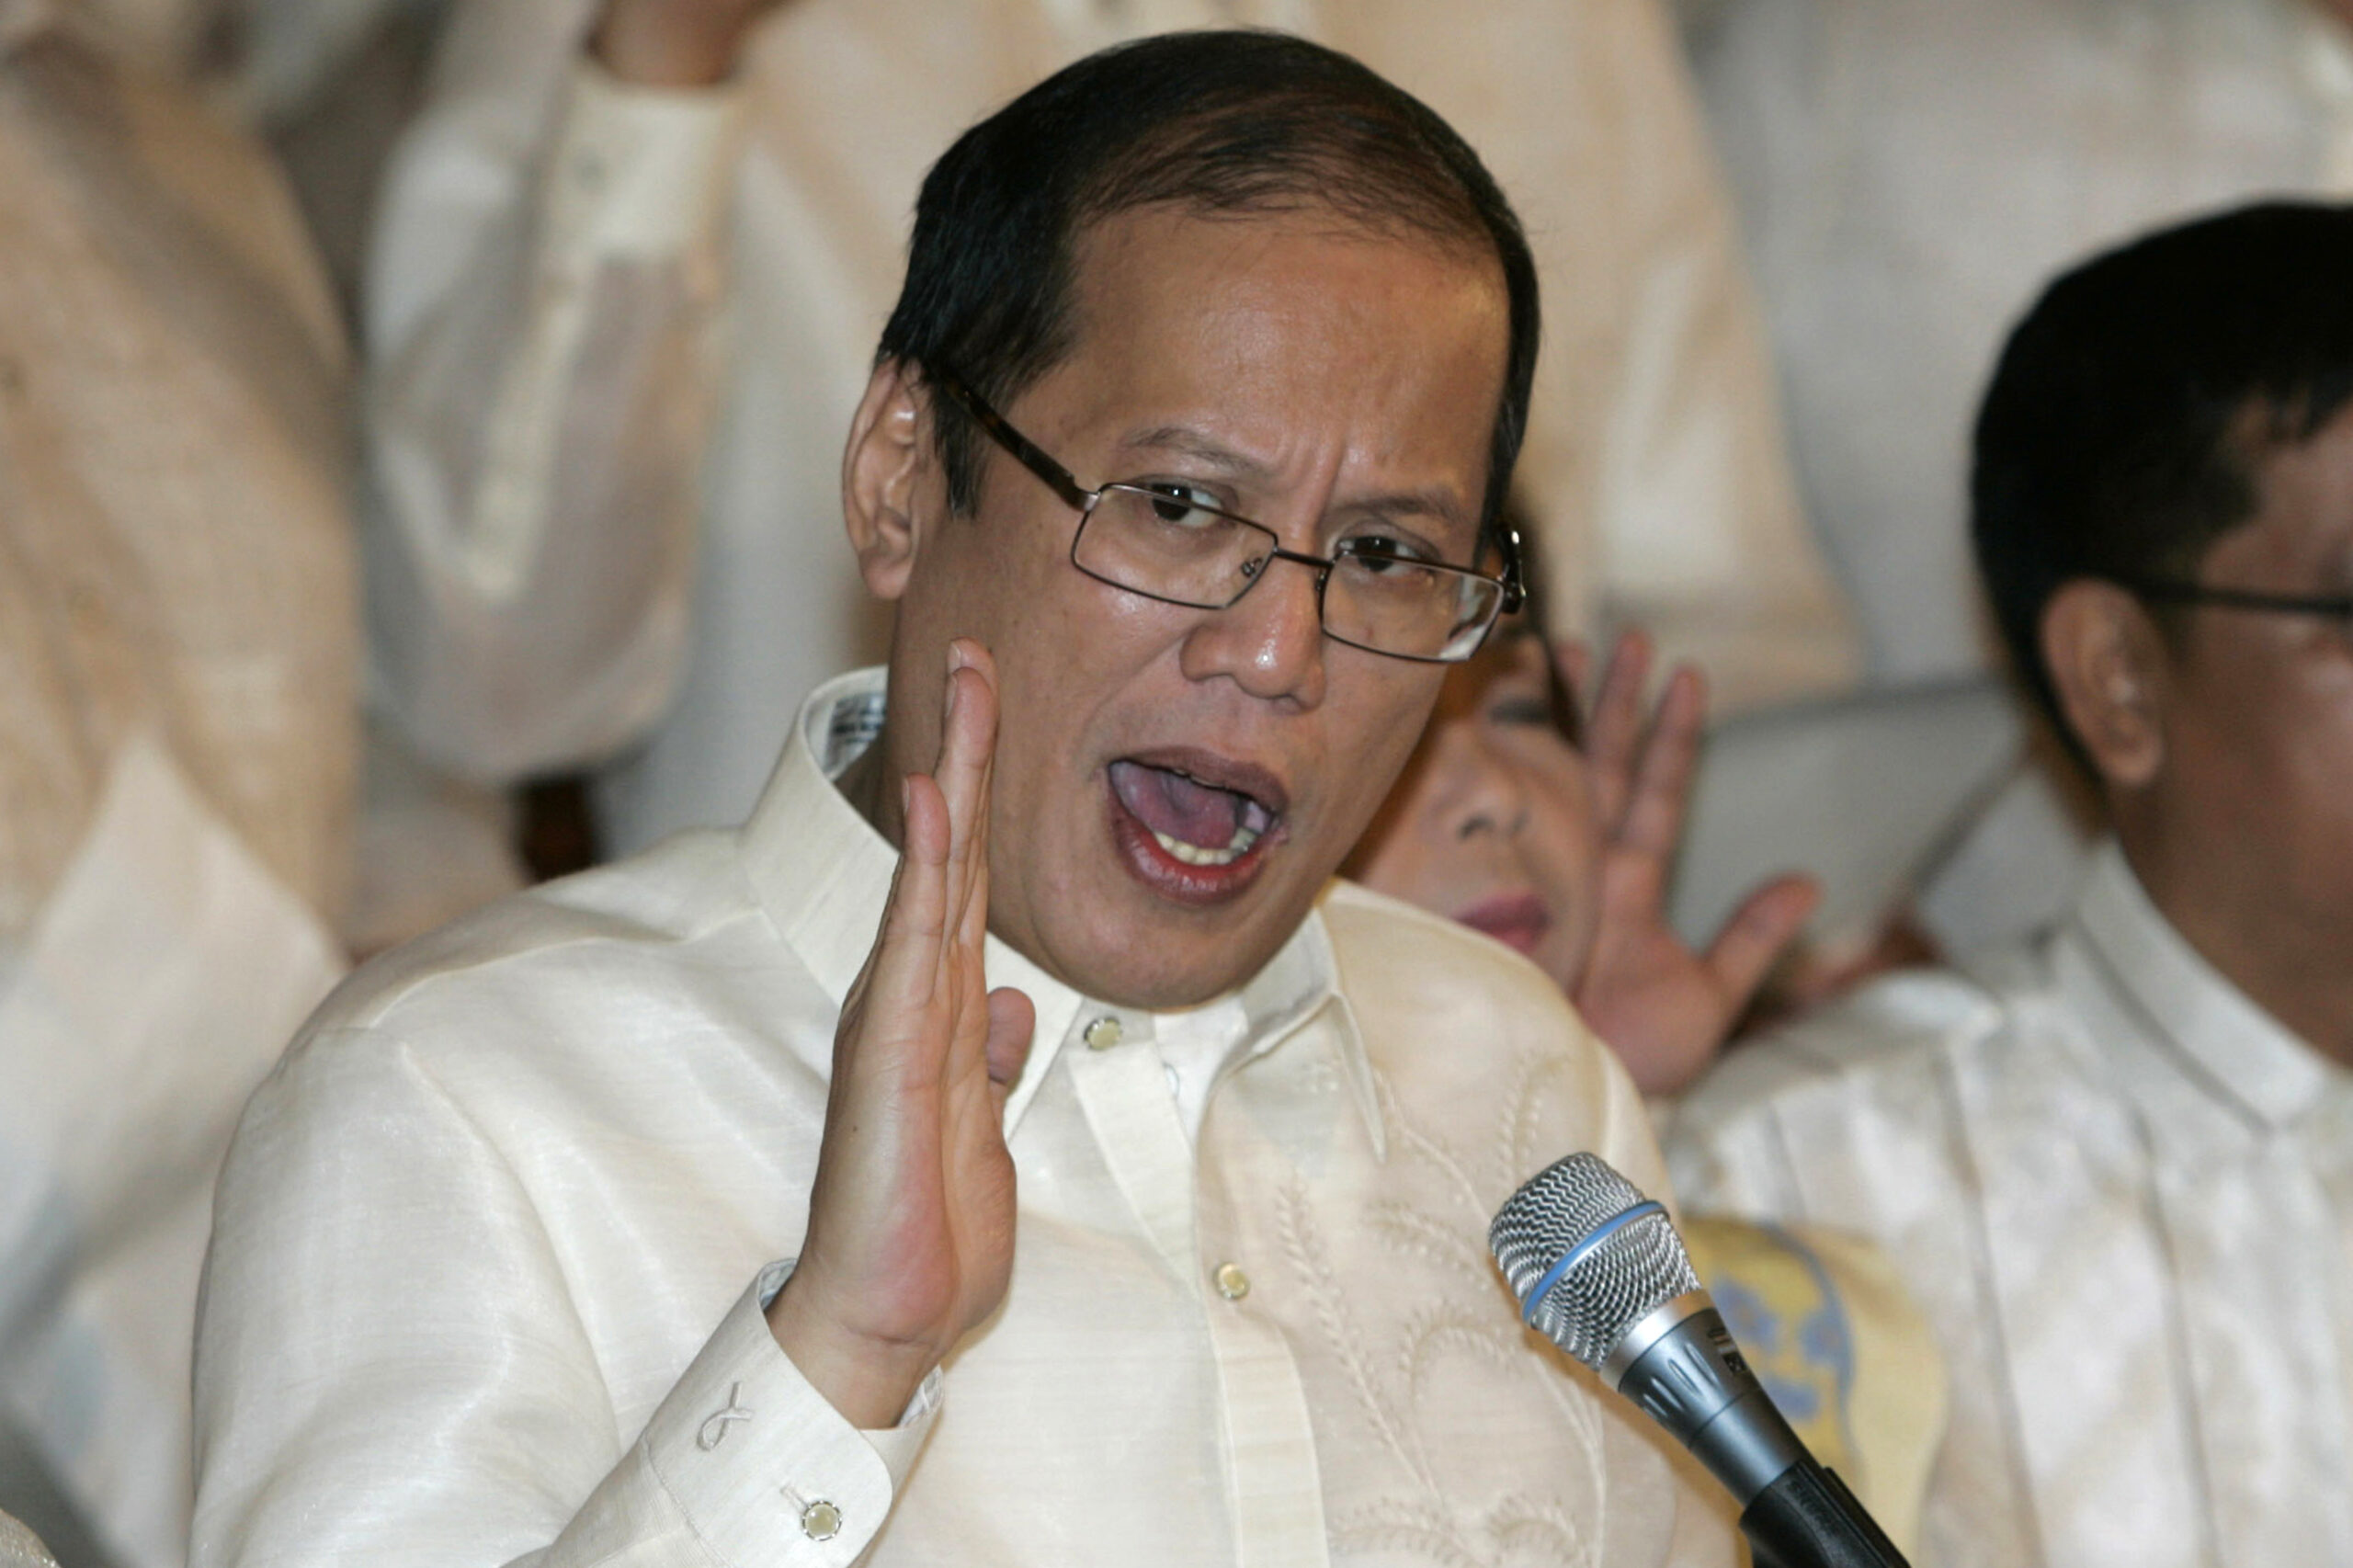 FILE - In this June 30, 2010, file photo, then newly inaugurated Philippine President Benigno Aquino III, center, swears in local officials during his first day at the Malacanang presidential palace in Manila, Philippines. Aquino, the son of pro-democracy icons who helped topple dictator Ferdinand Marcos and had troublesome ties with China, died Thursday, June 24, 2021, a cousin and public officials said. (AP Photo/Aaron Favila, File)